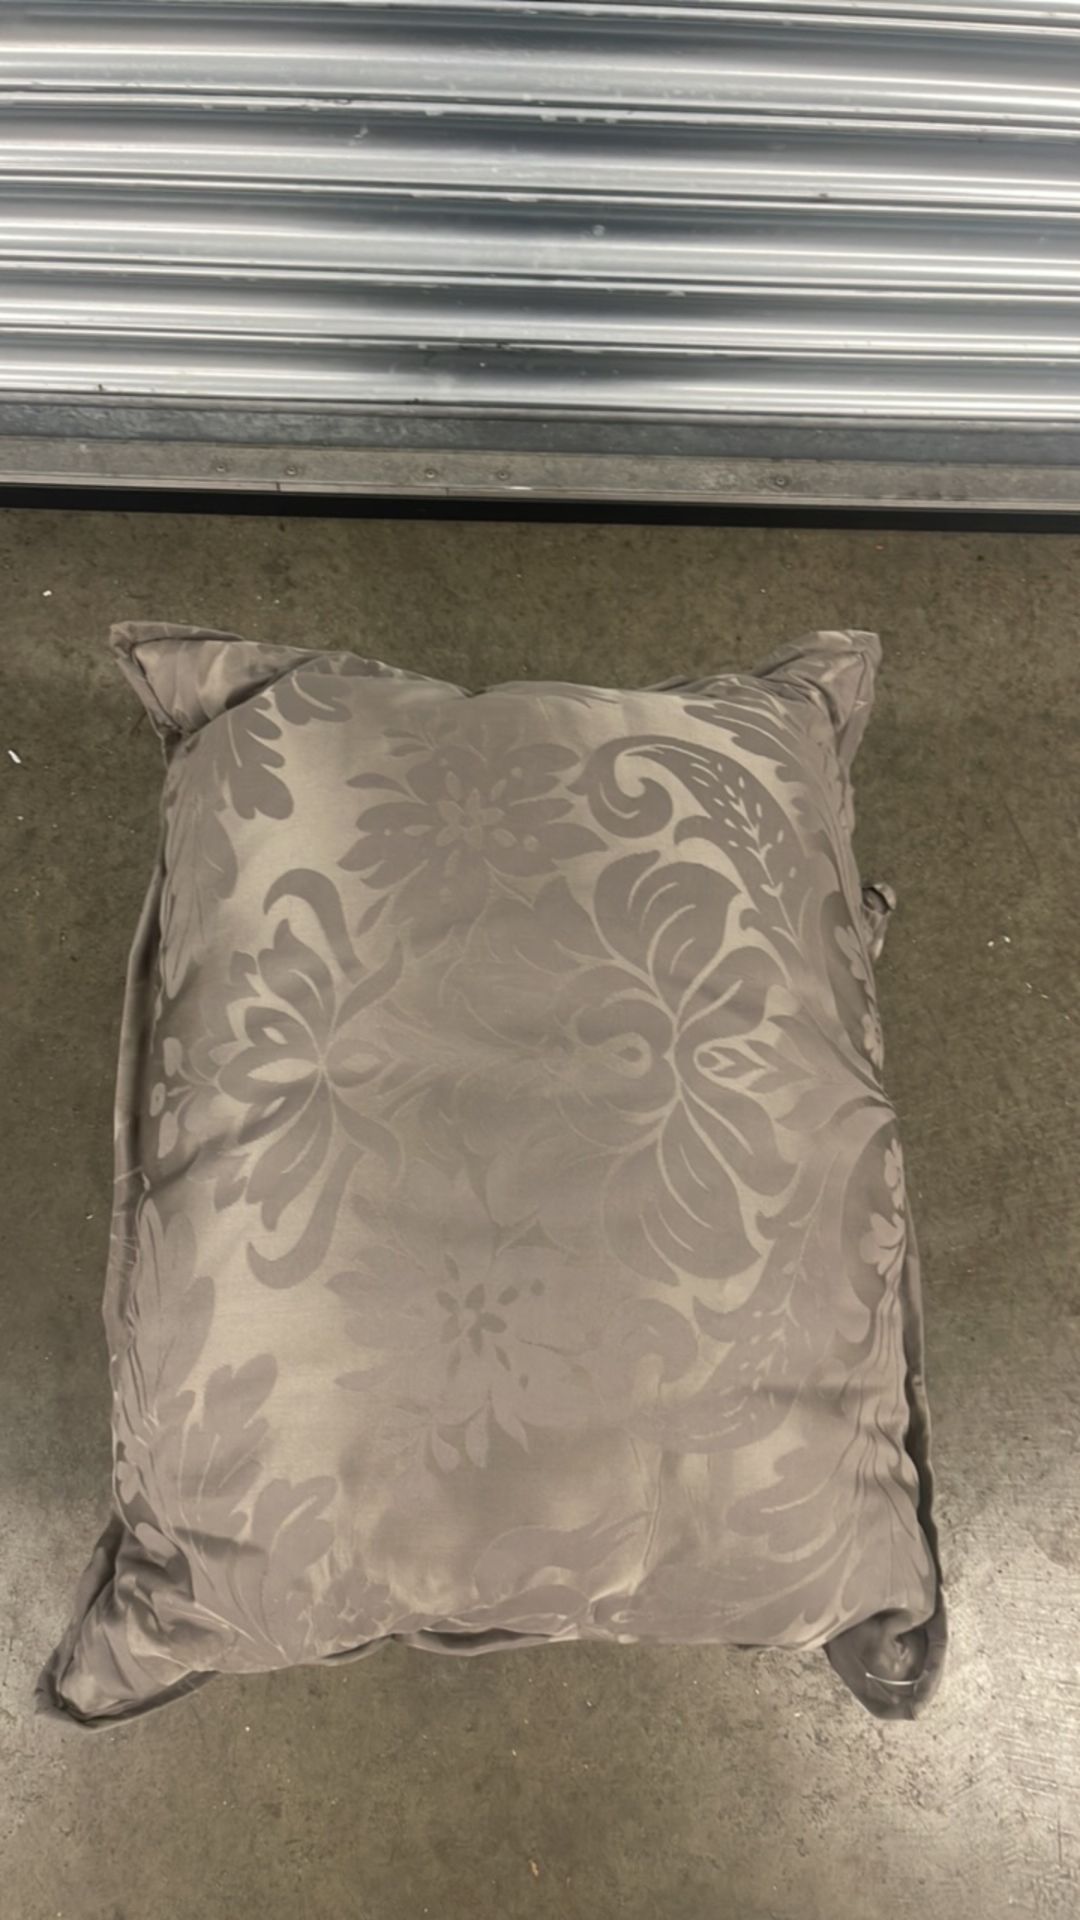 Grey Sofa Cushions with Floral Design x 3 - Image 2 of 3